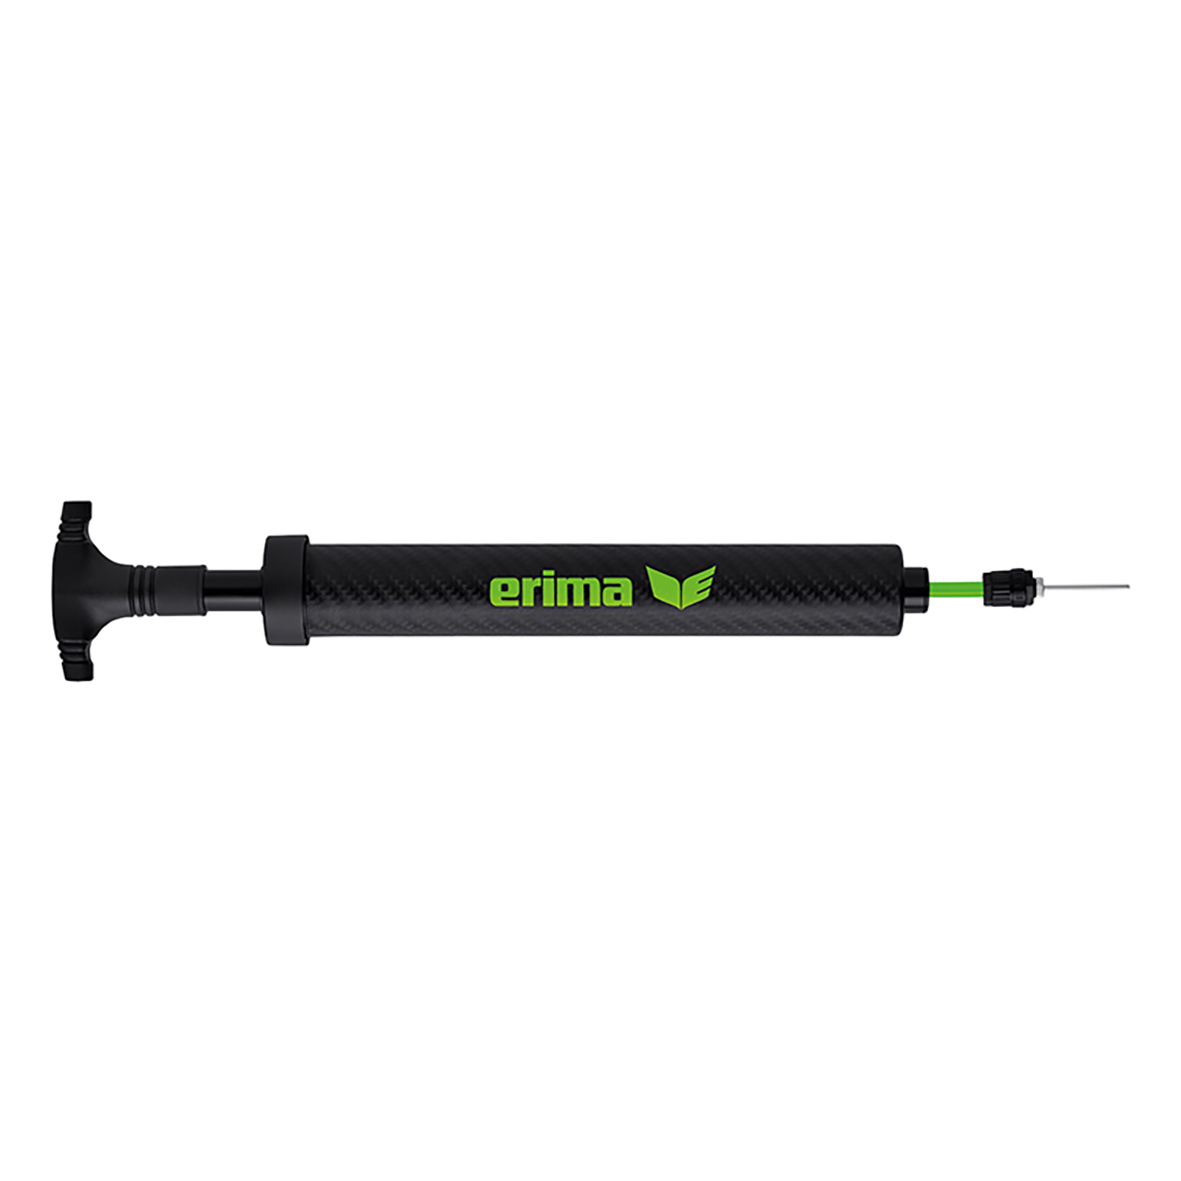 ERIMA 12' AIR PUMP WITH FIXED NEEDLE COMPARTMENT COVER.